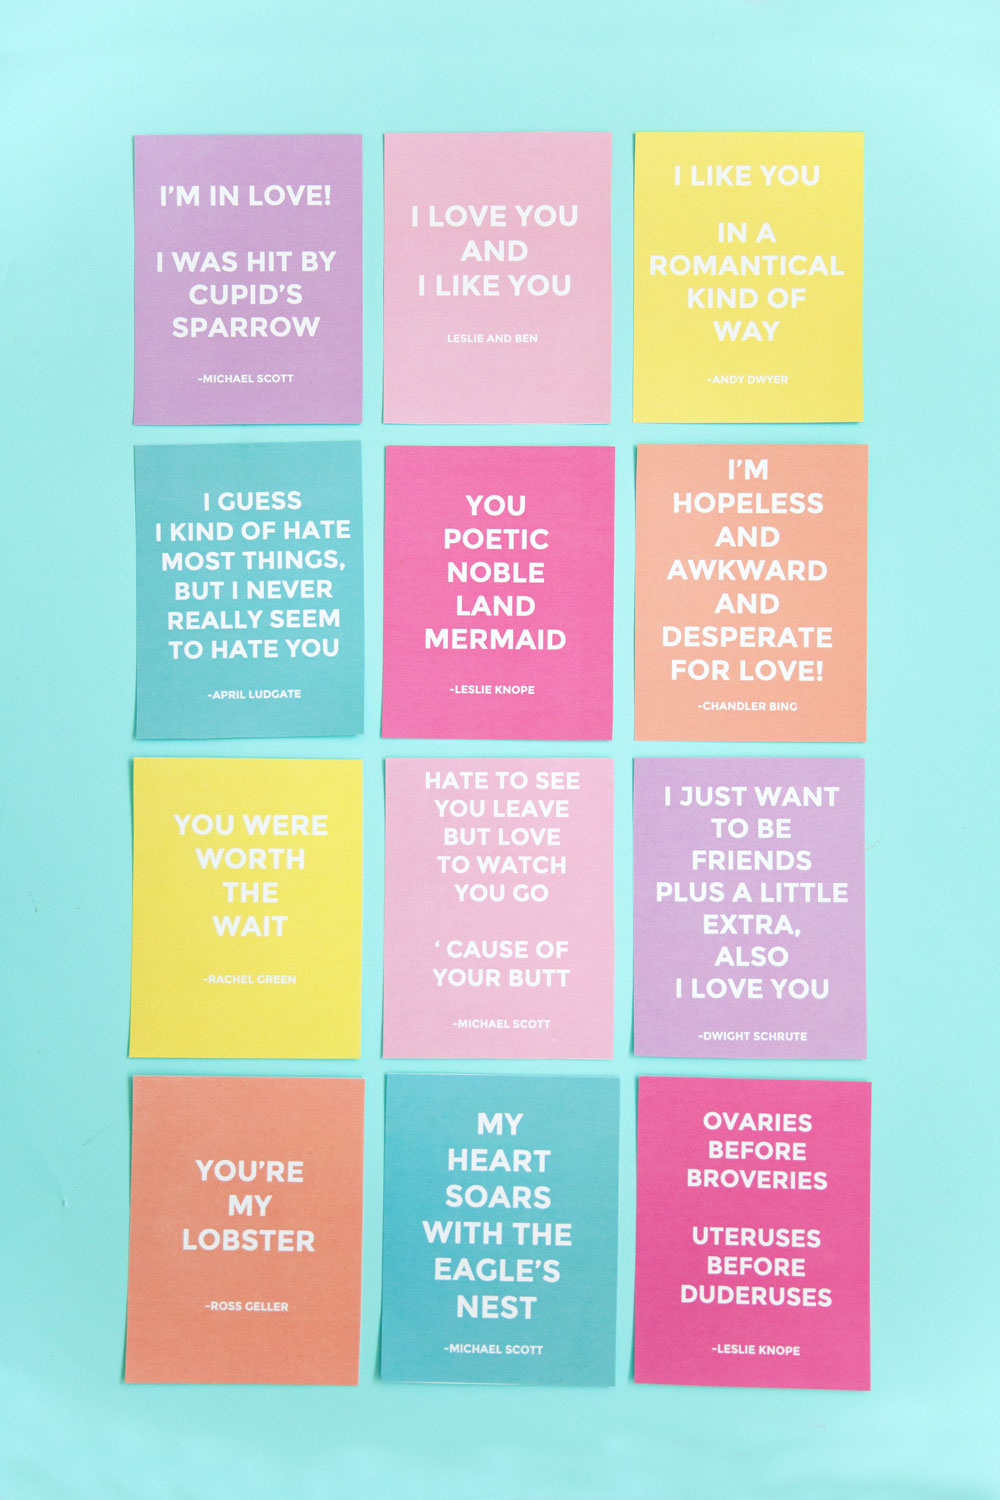 These funny quote Valentine's are sure to get some laughs. All quotes from The Office, Parks and Rec and Friends... some of the best shows ever!